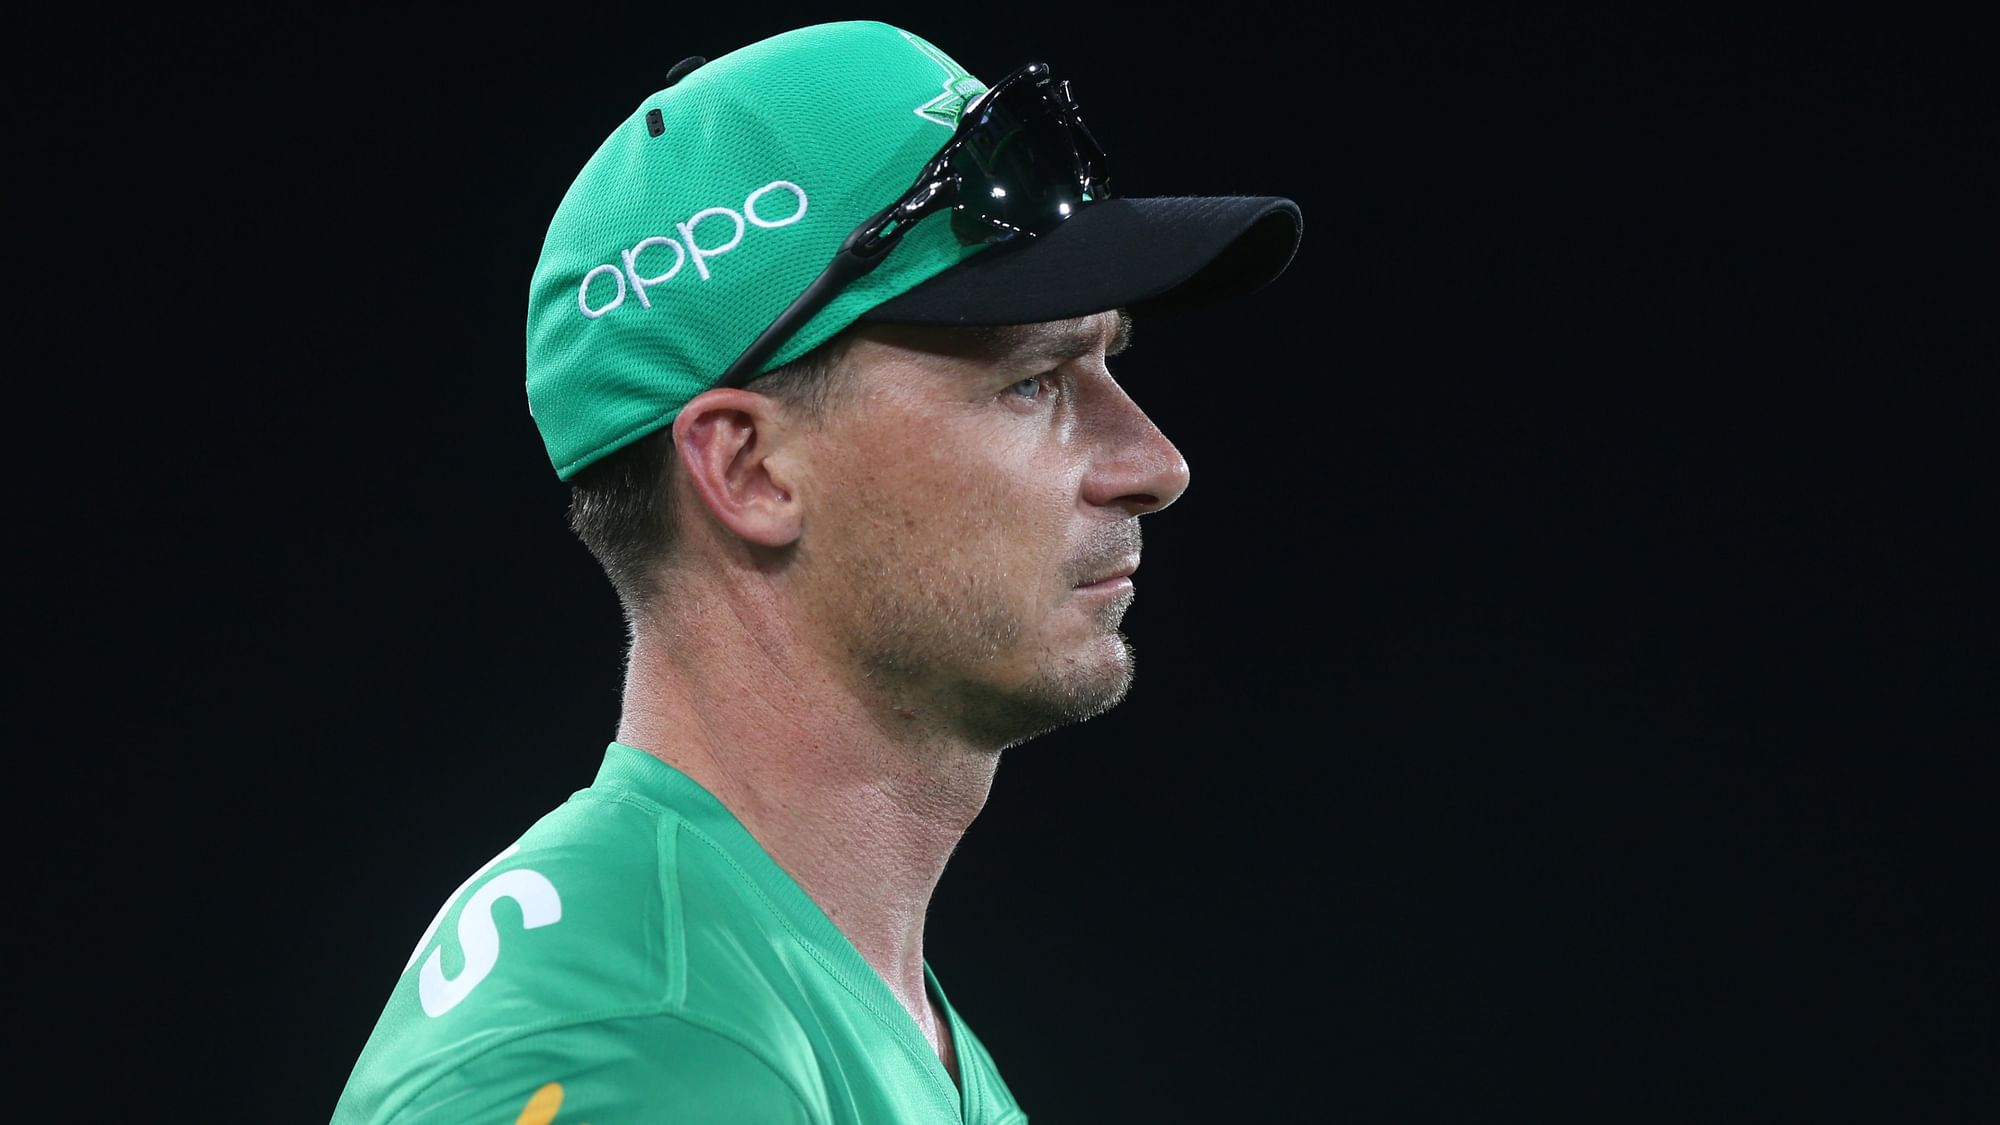 South African Pacer Dale Steyn made a great comeback after getting smashed for 20 runs in five balls during his Big Bash League debut for Melbourne Stars against Adelaide Strikers on Friday, 27 December.